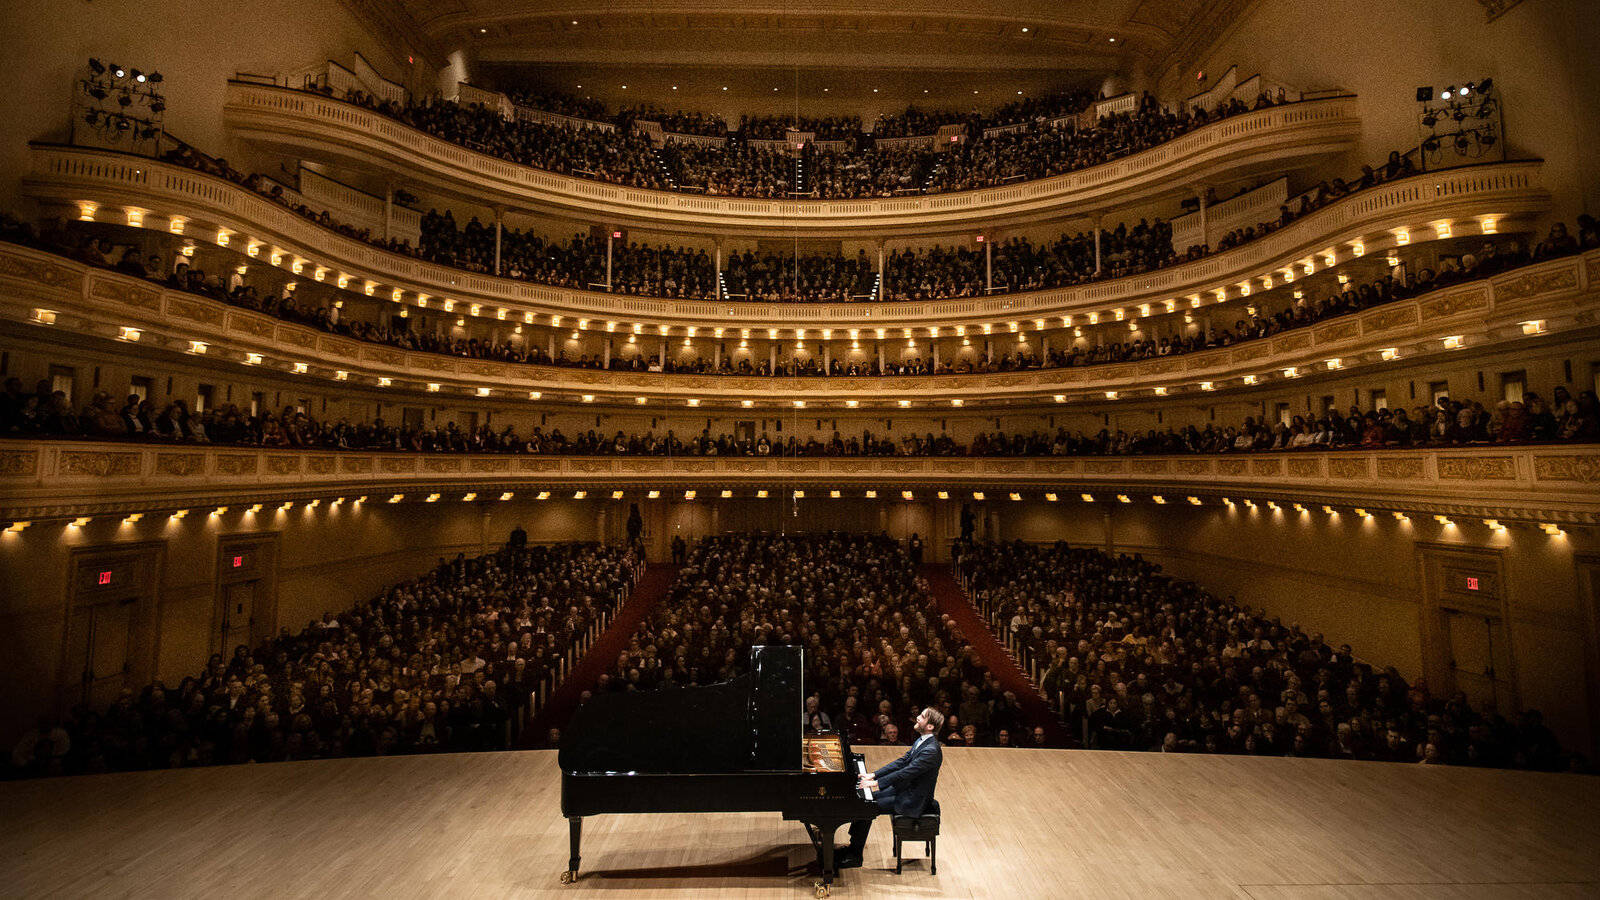 Piano Performance At Carnegie Hall Wallpaper